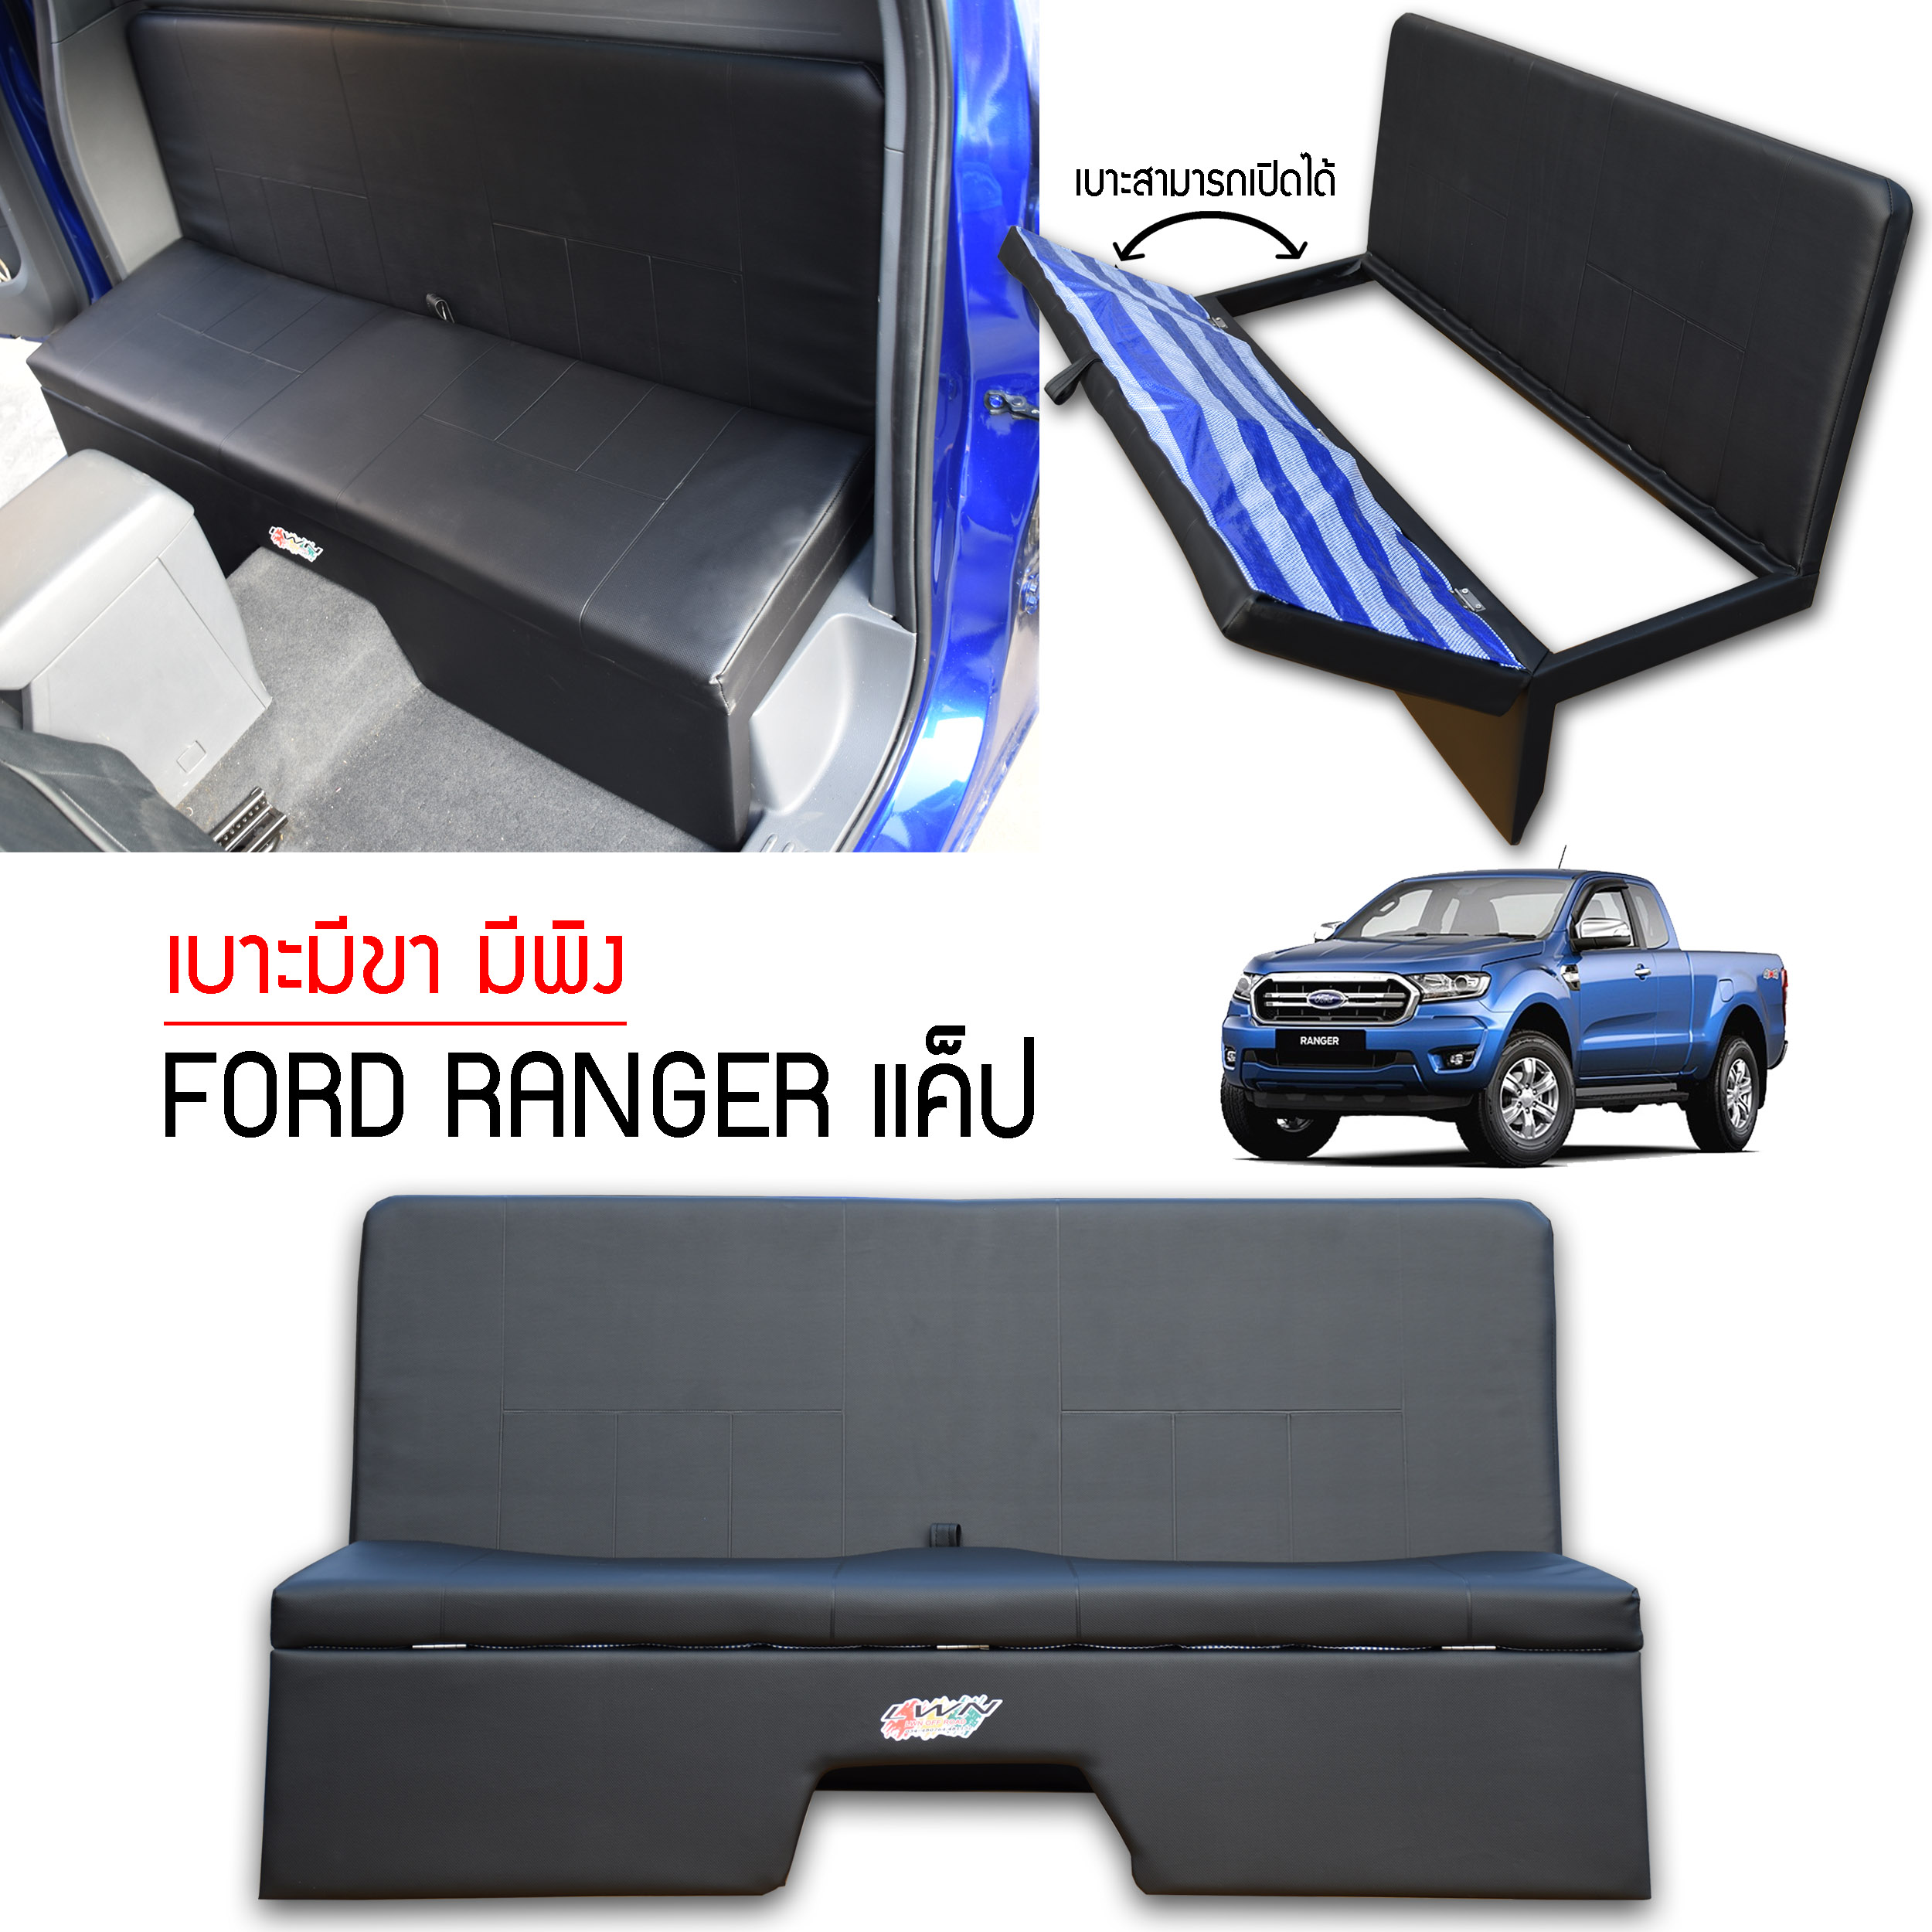 Smart Cab Seat for Ford Ranger 2012-2020 #2